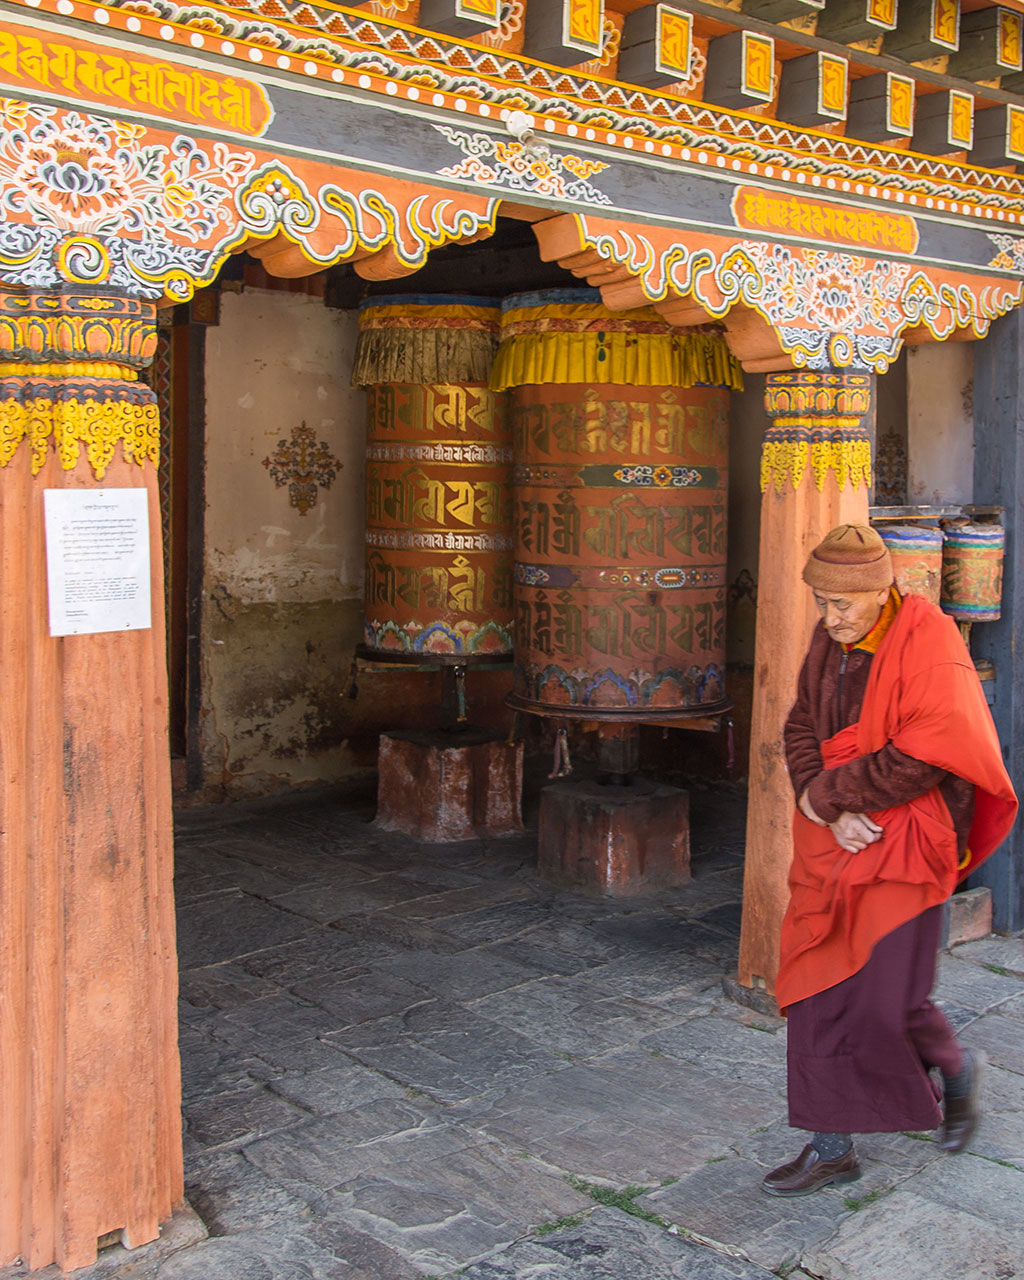 Giant prayer wheels that keep rotating on a festival day.